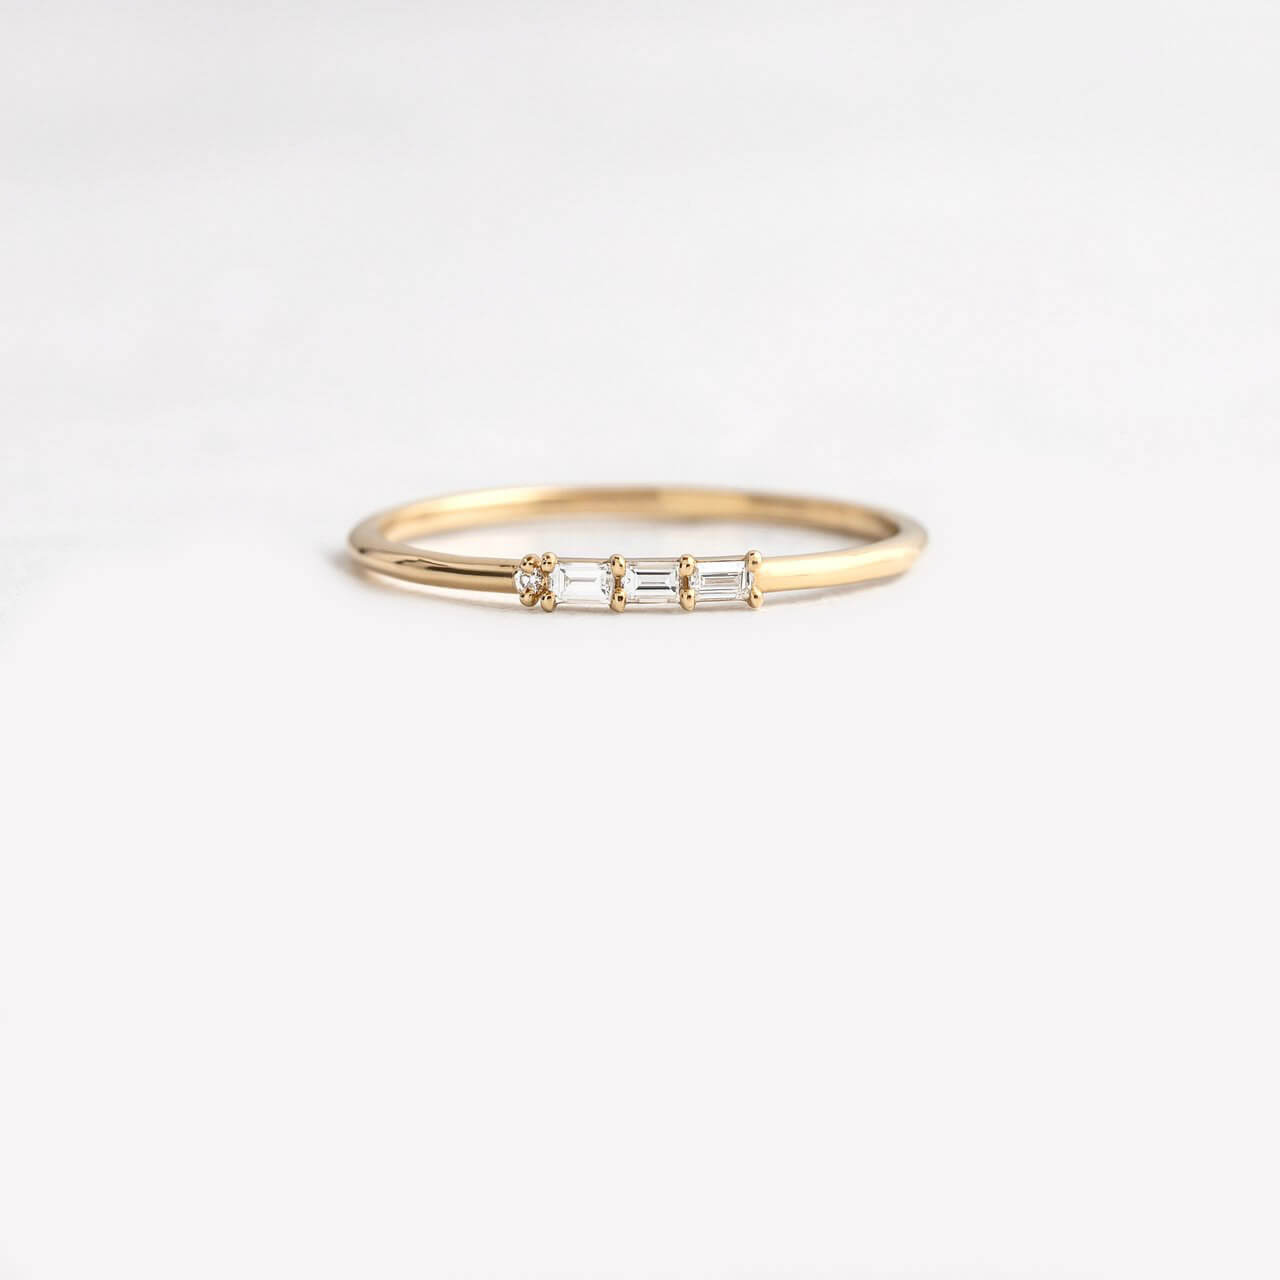 Morse Code Ring, Yellow Gold - Letter "J"